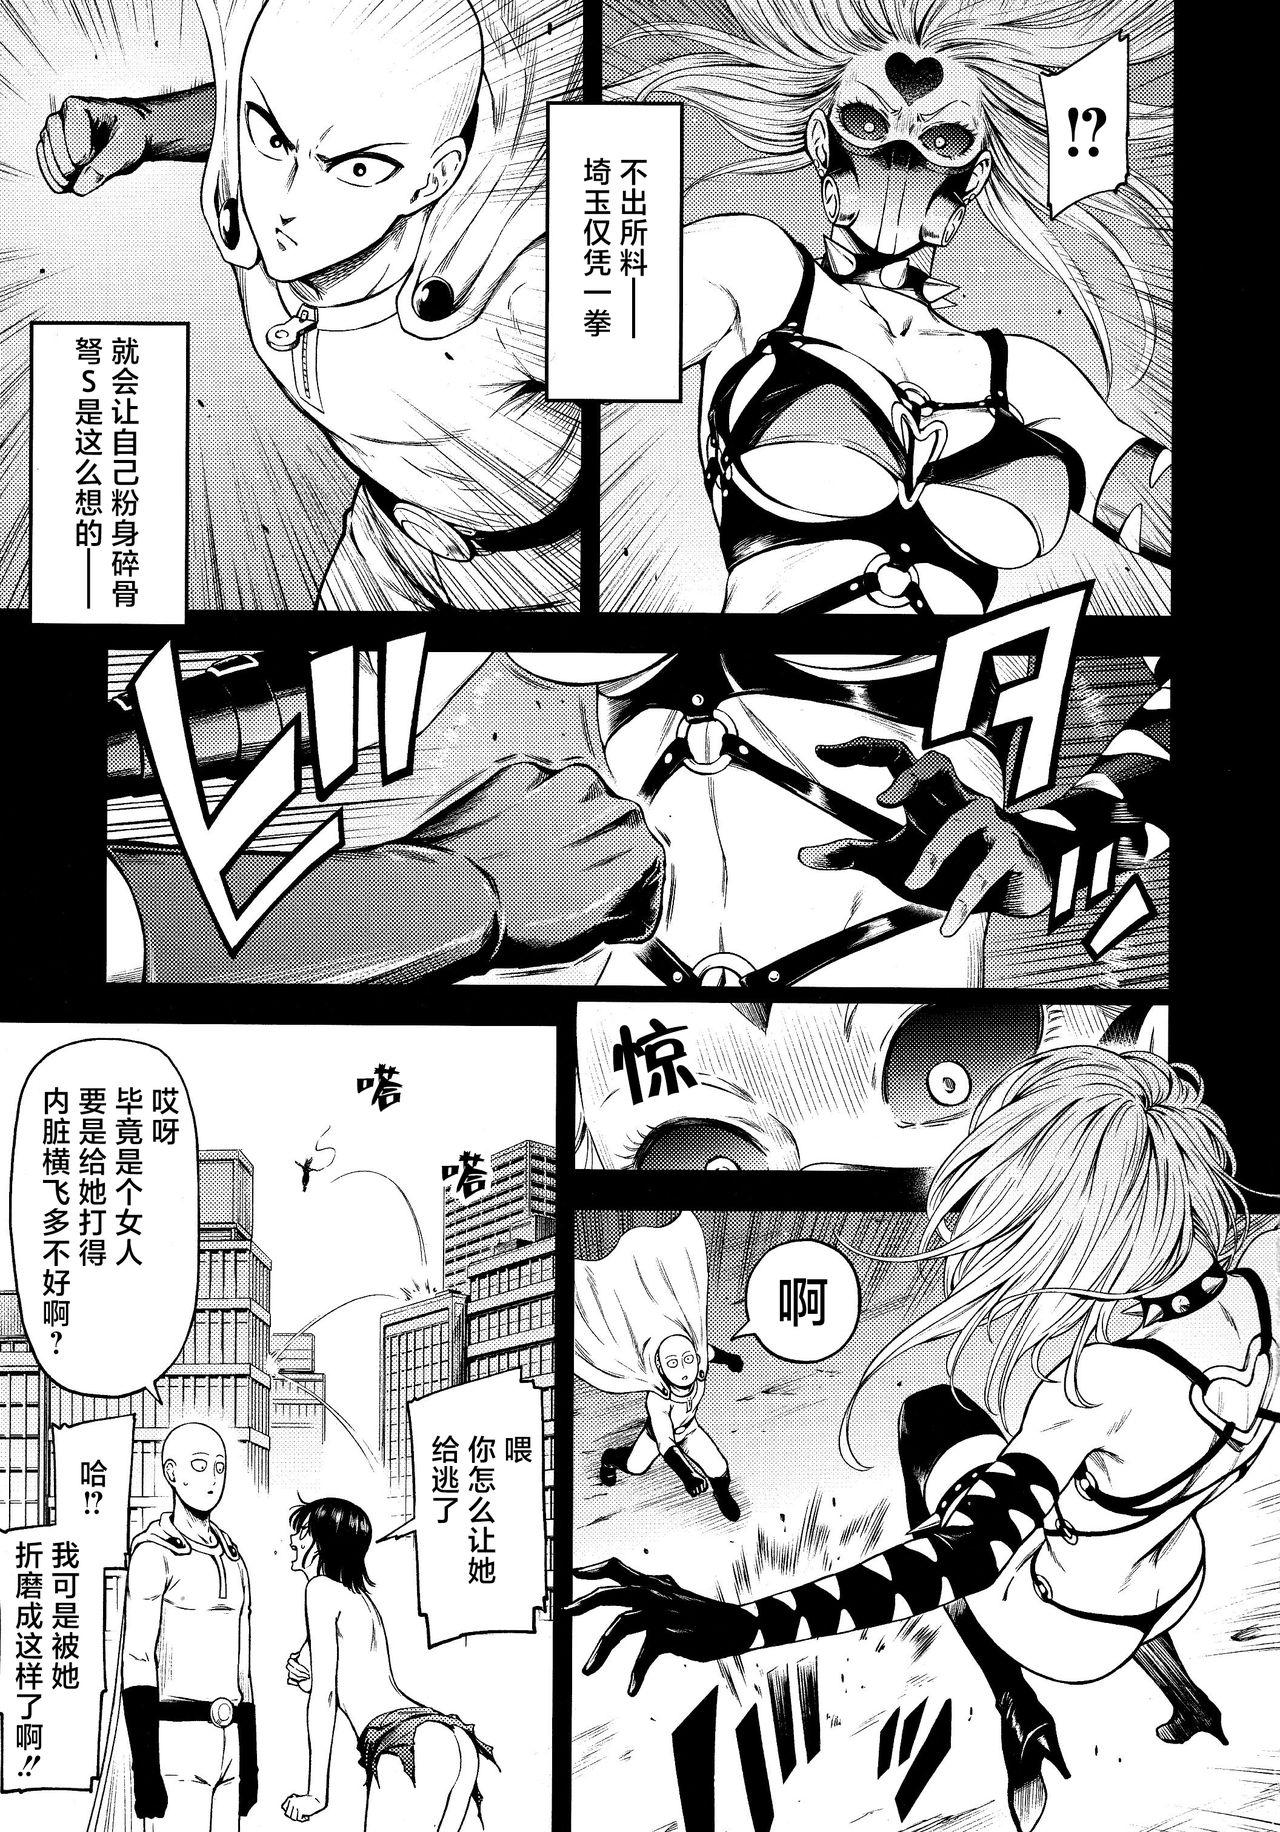 Cute ONE-HURRICANE 8 - One punch man First - Page 2